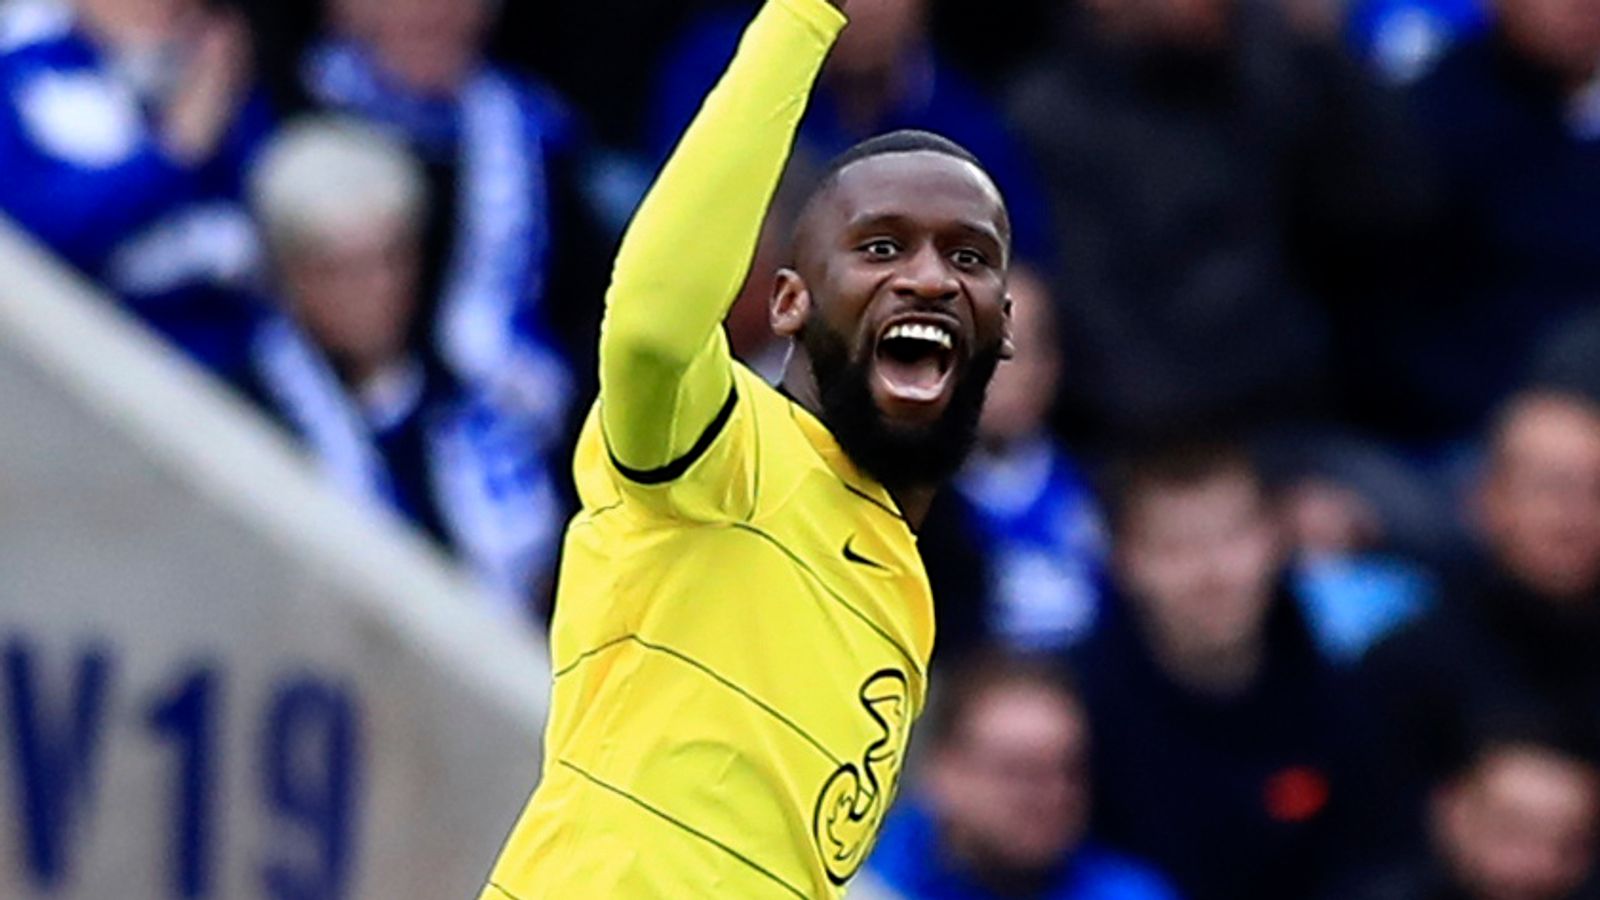 Former Chelsea defender Antonio Rudiger: I would wind players up if stadiums were too quiet